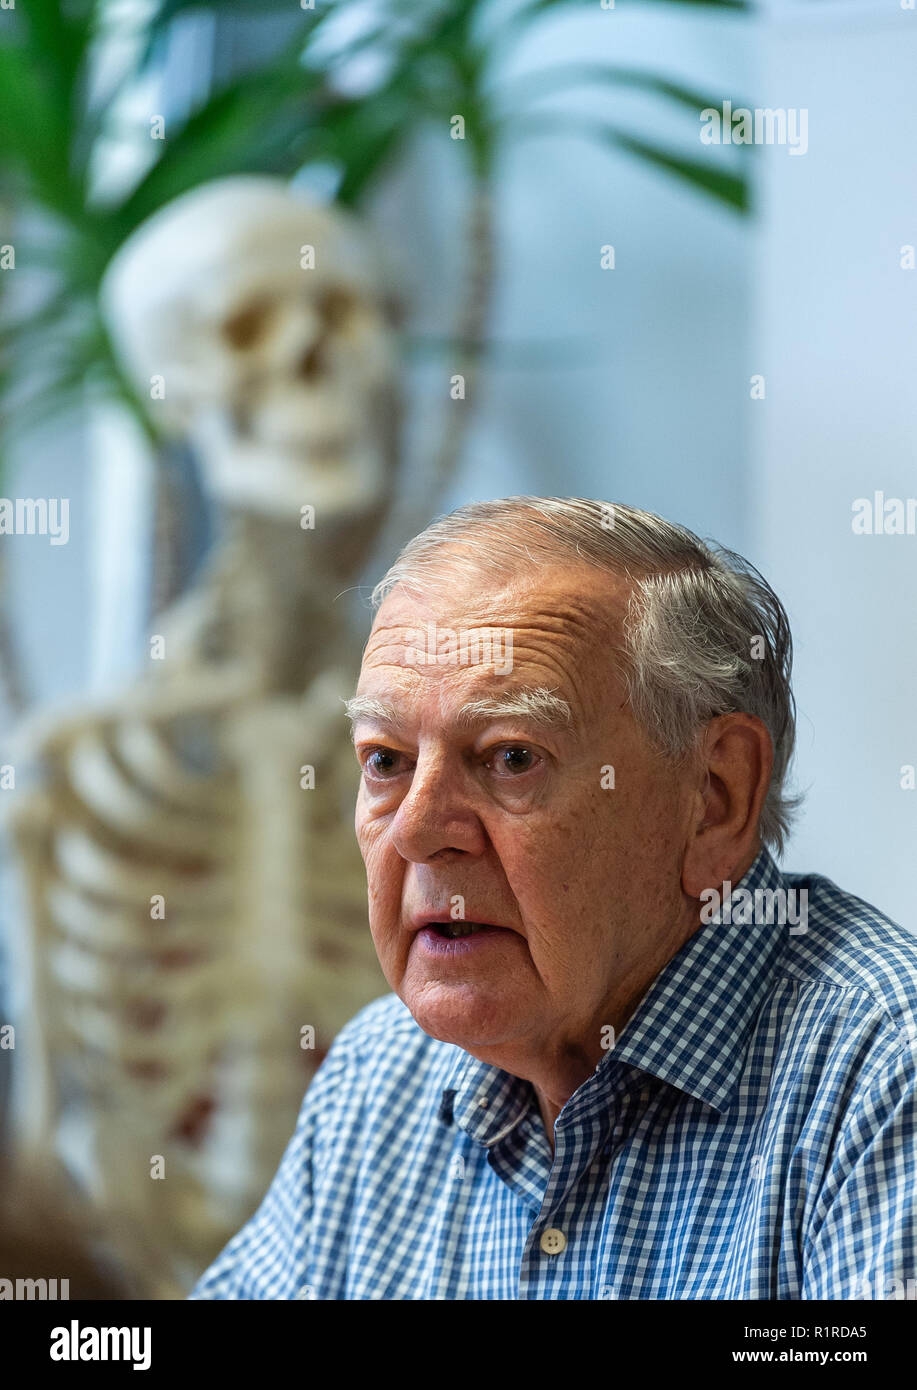 14 November 2018, Hessen, Frankfurt/Main: The American paleoanthropologist and discoverer of the skeleton 'Lucy', Donald C. Johanson, speaks to journalists during a press conference at the Senckenberg Museum. The paleoanthropologist discovered the Australopithecus afarensis skeletal remains 44 years ago in Ethiopia. The skeleton 'Lucy' was long regarded as the oldest evidence of the upright gait of our ancestors. The skeleton in the background doesn't represent Lucy. Photo: Silas Stein/dpa Stock Photo